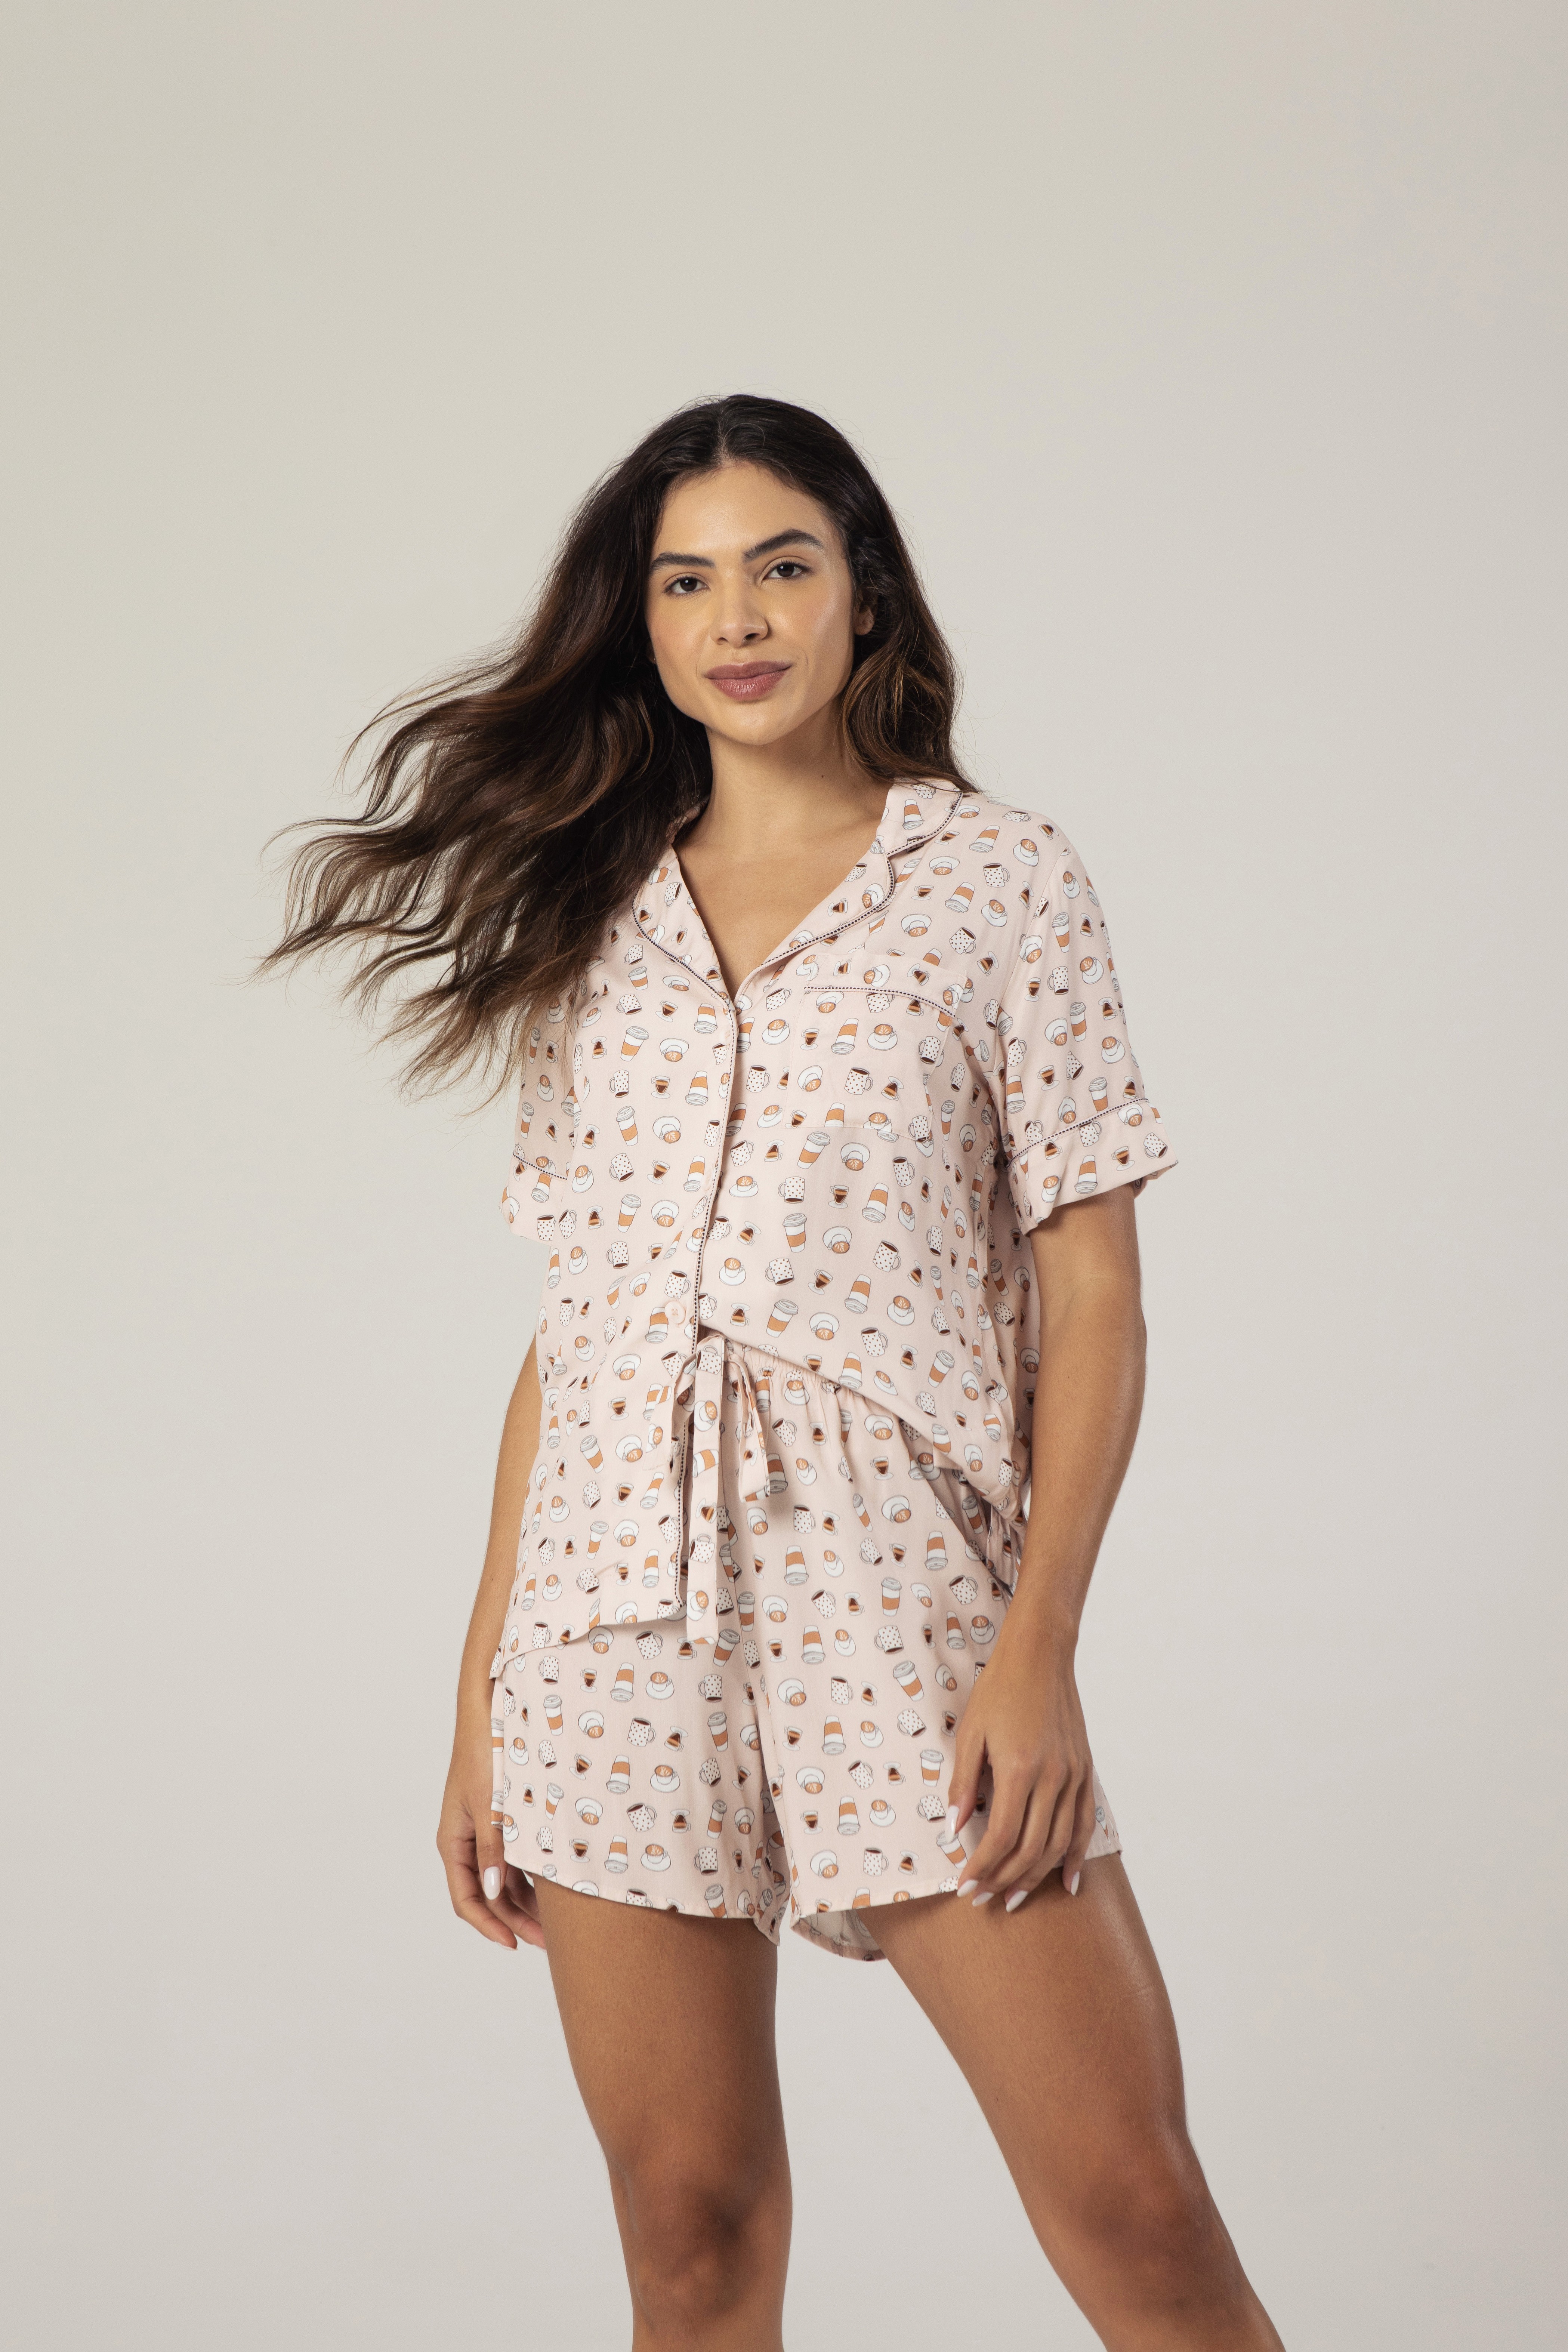 Pijama Clara Dolce Lovers - Collab Dolce Gusto - Ava Intimates